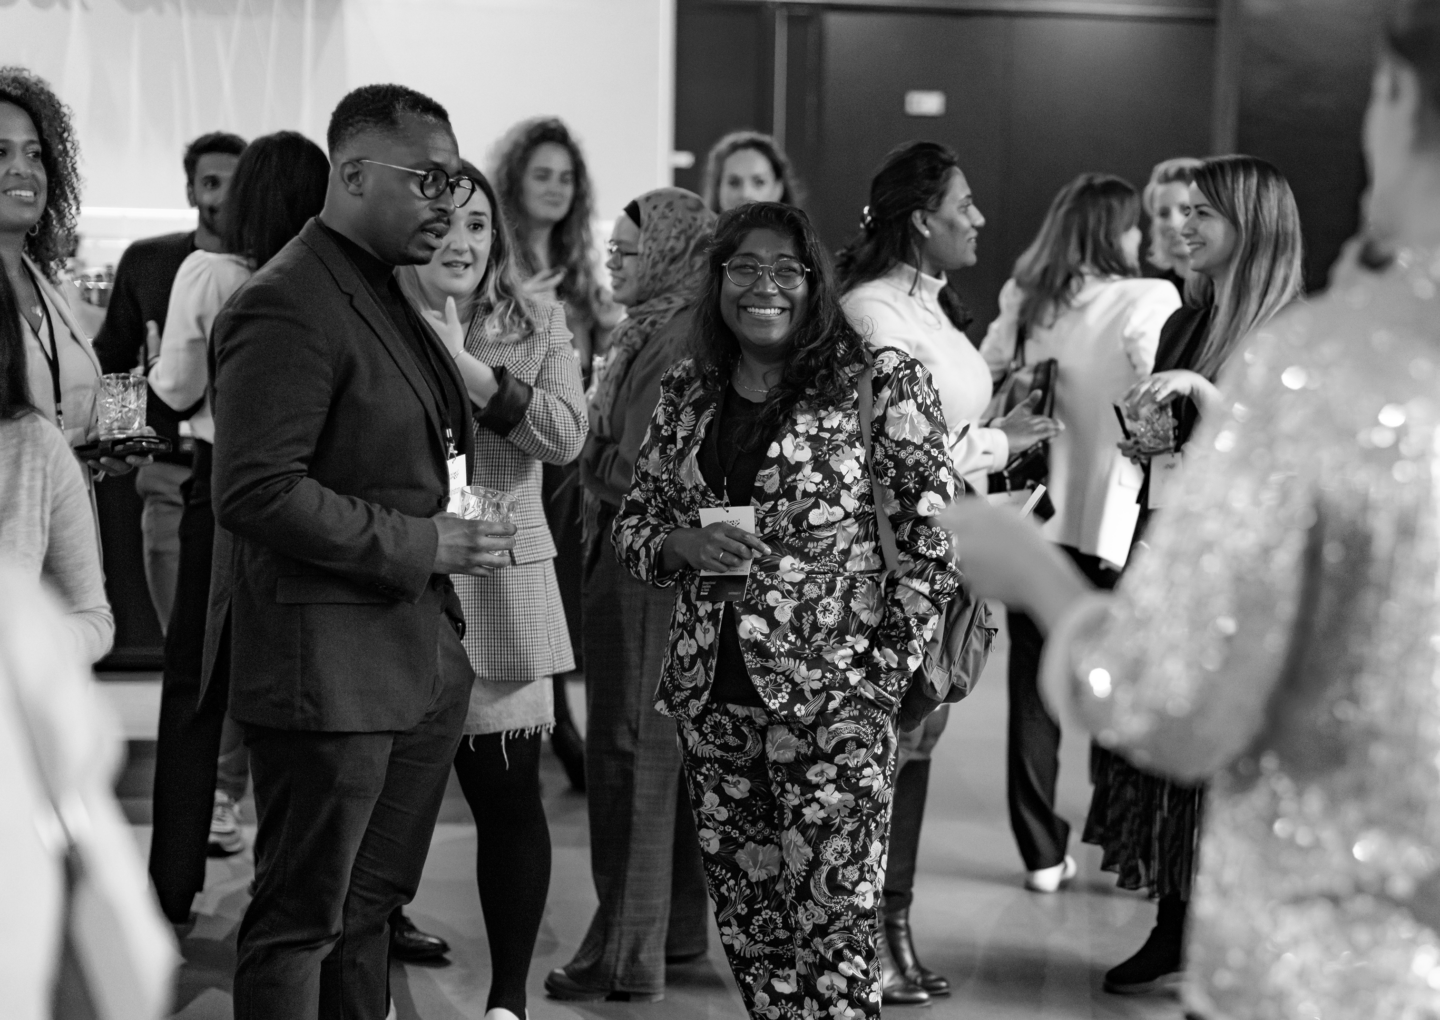 Diverse Leaders in Tech gathering and networking event